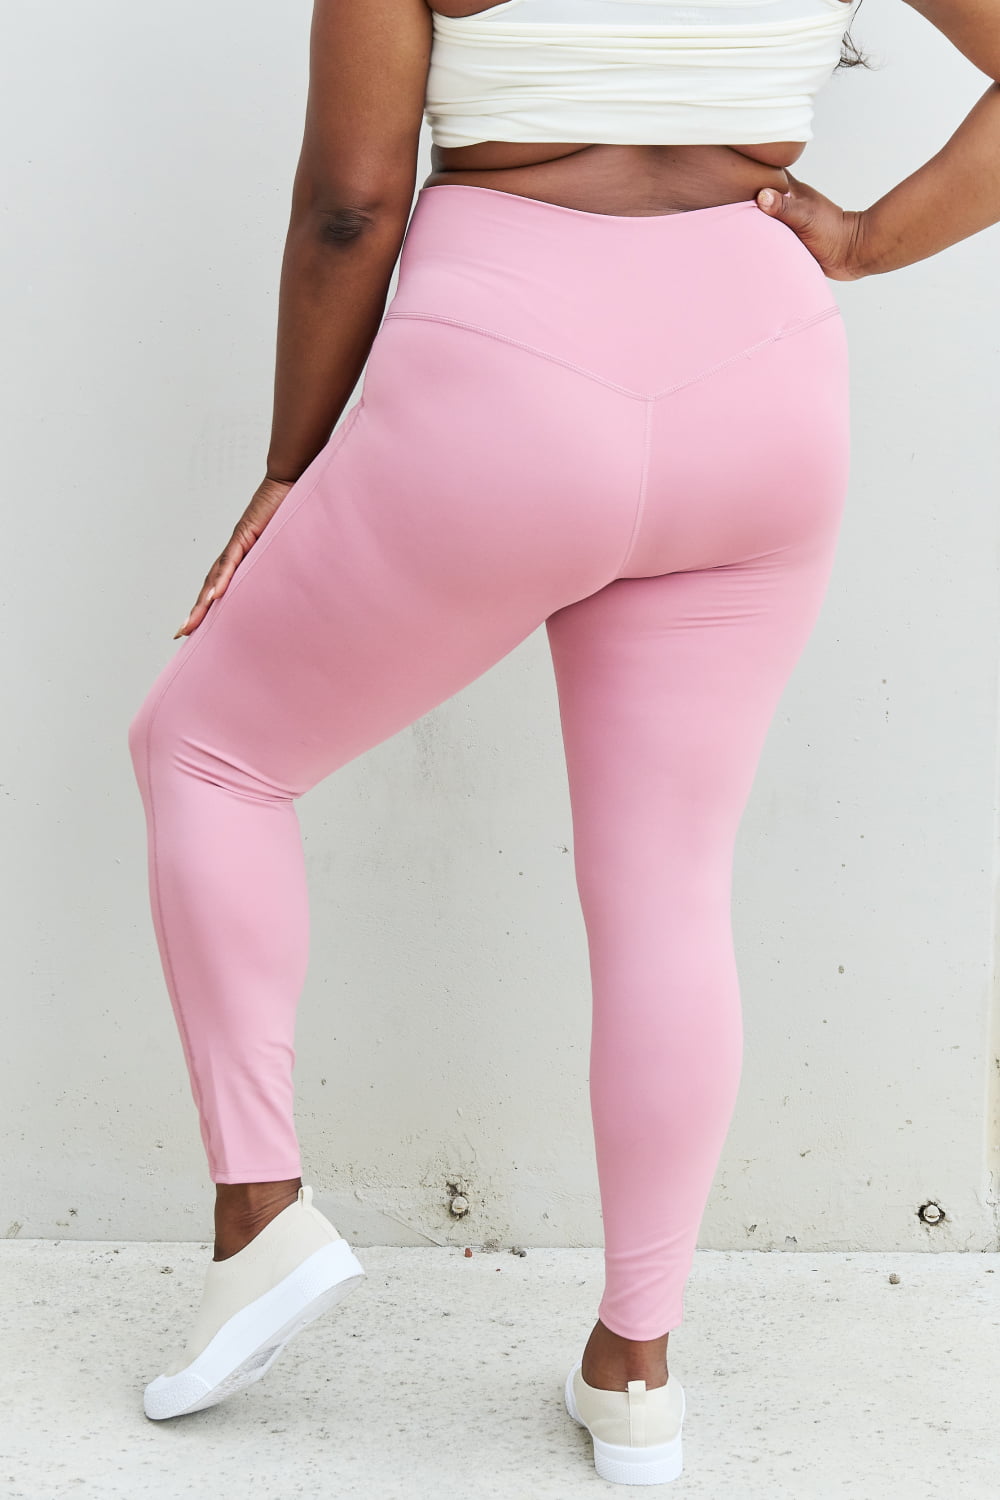 Fit For You Full Size High Waist Active Leggings in Light Rose - Women’s Clothing & Accessories - Activewear - 10 - 2024